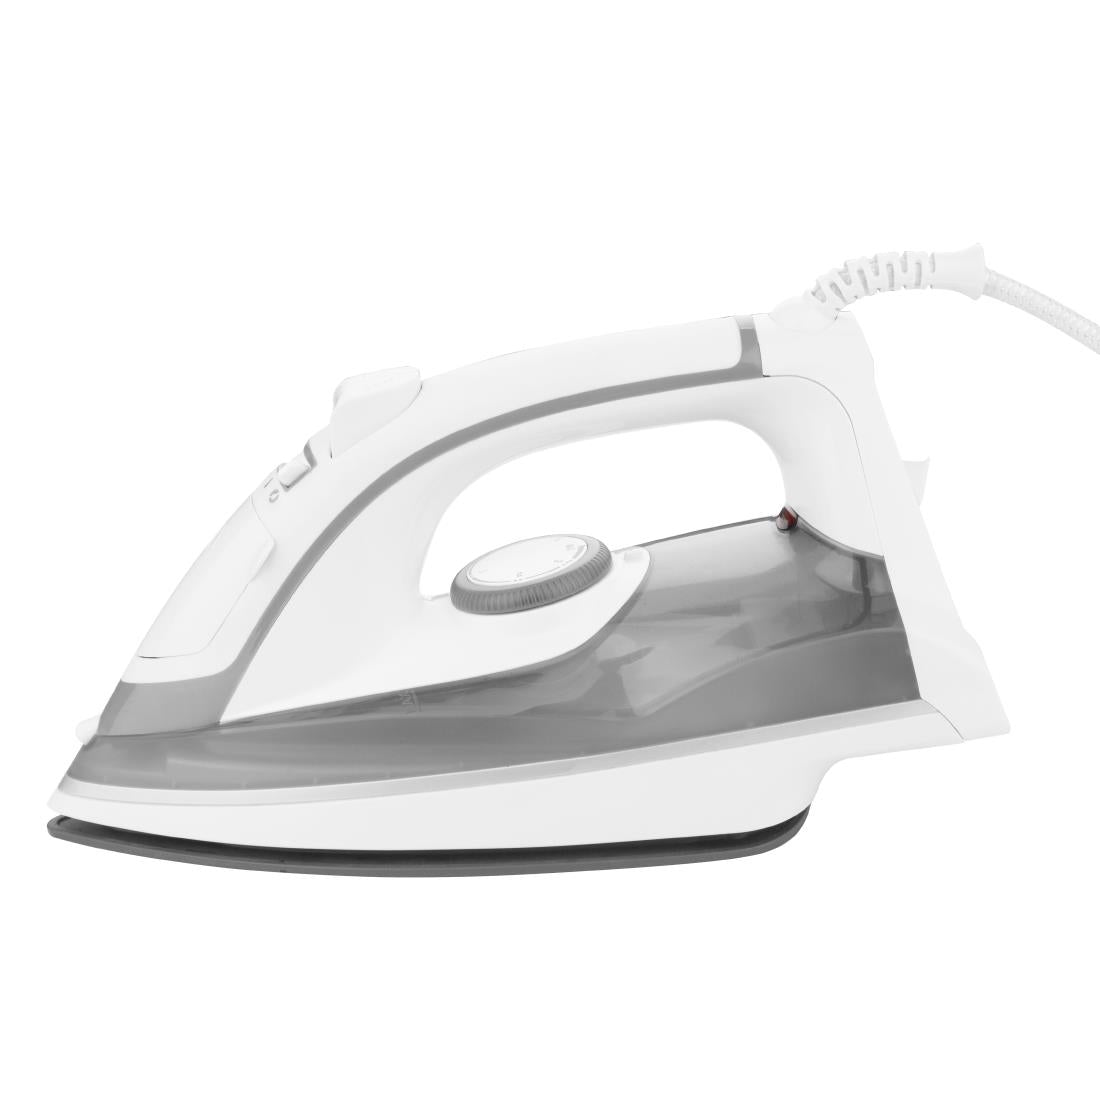 CH356 Caterlite Steam Iron JD Catering Equipment Solutions Ltd